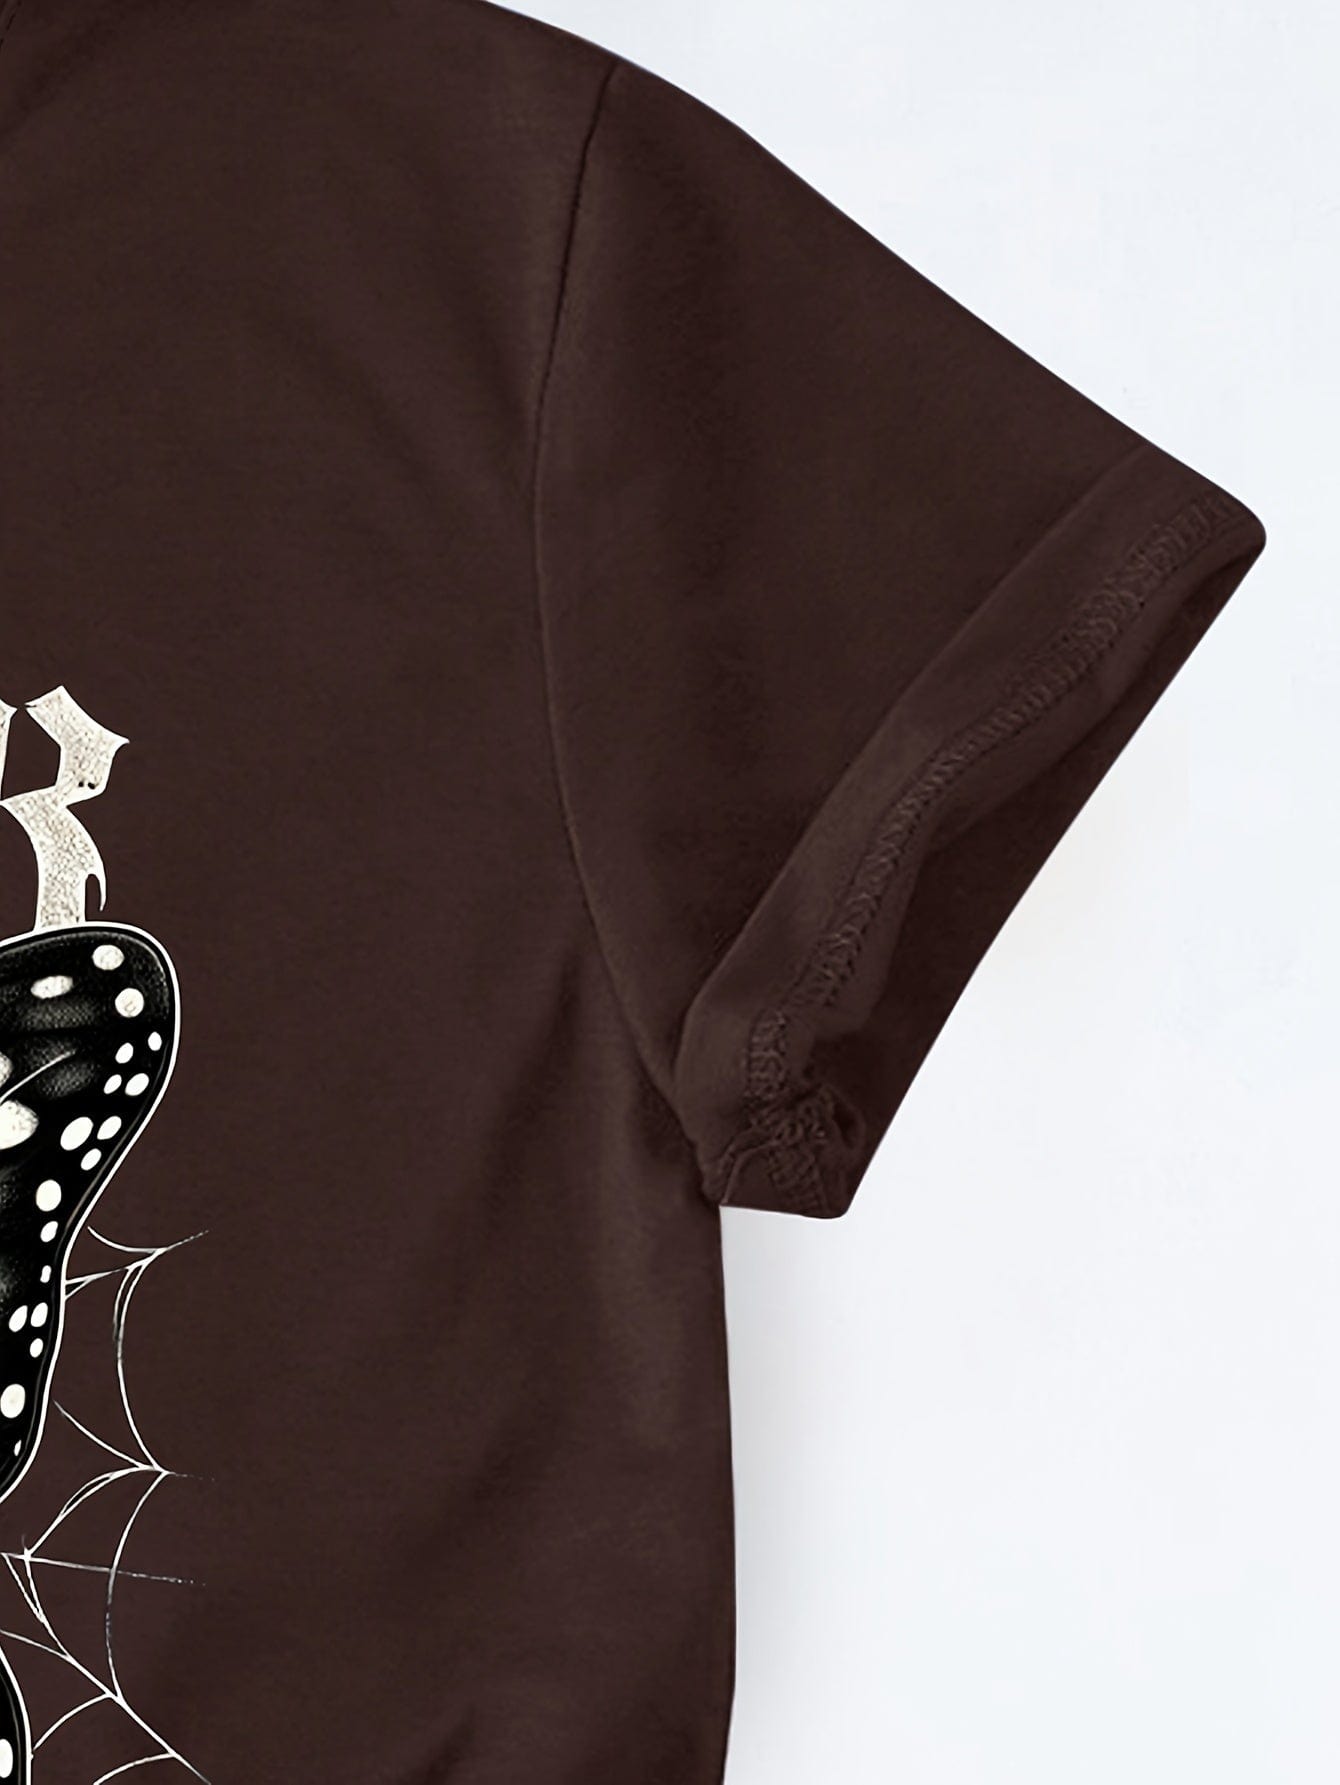 Skull and Butterfly Printed T-shirt for Women's Spring and Summer Fashion